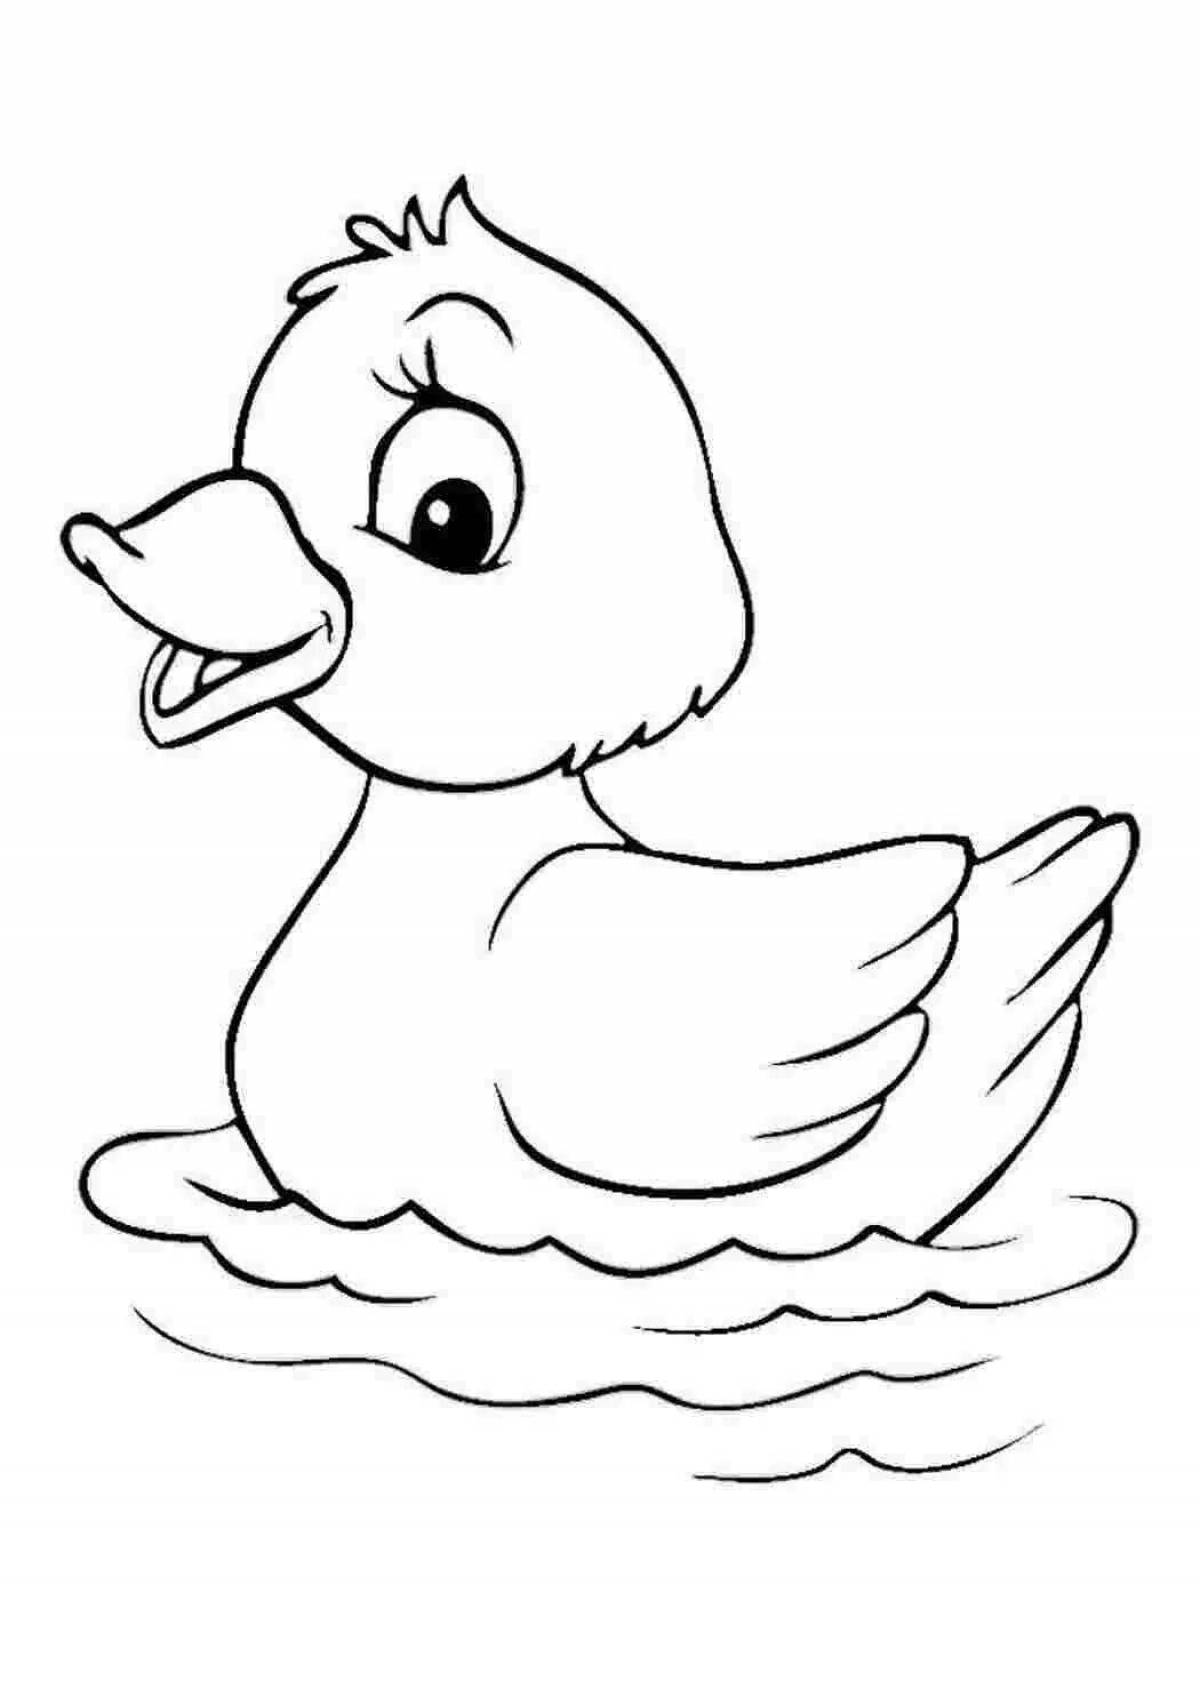 Colorful little duck coloring page